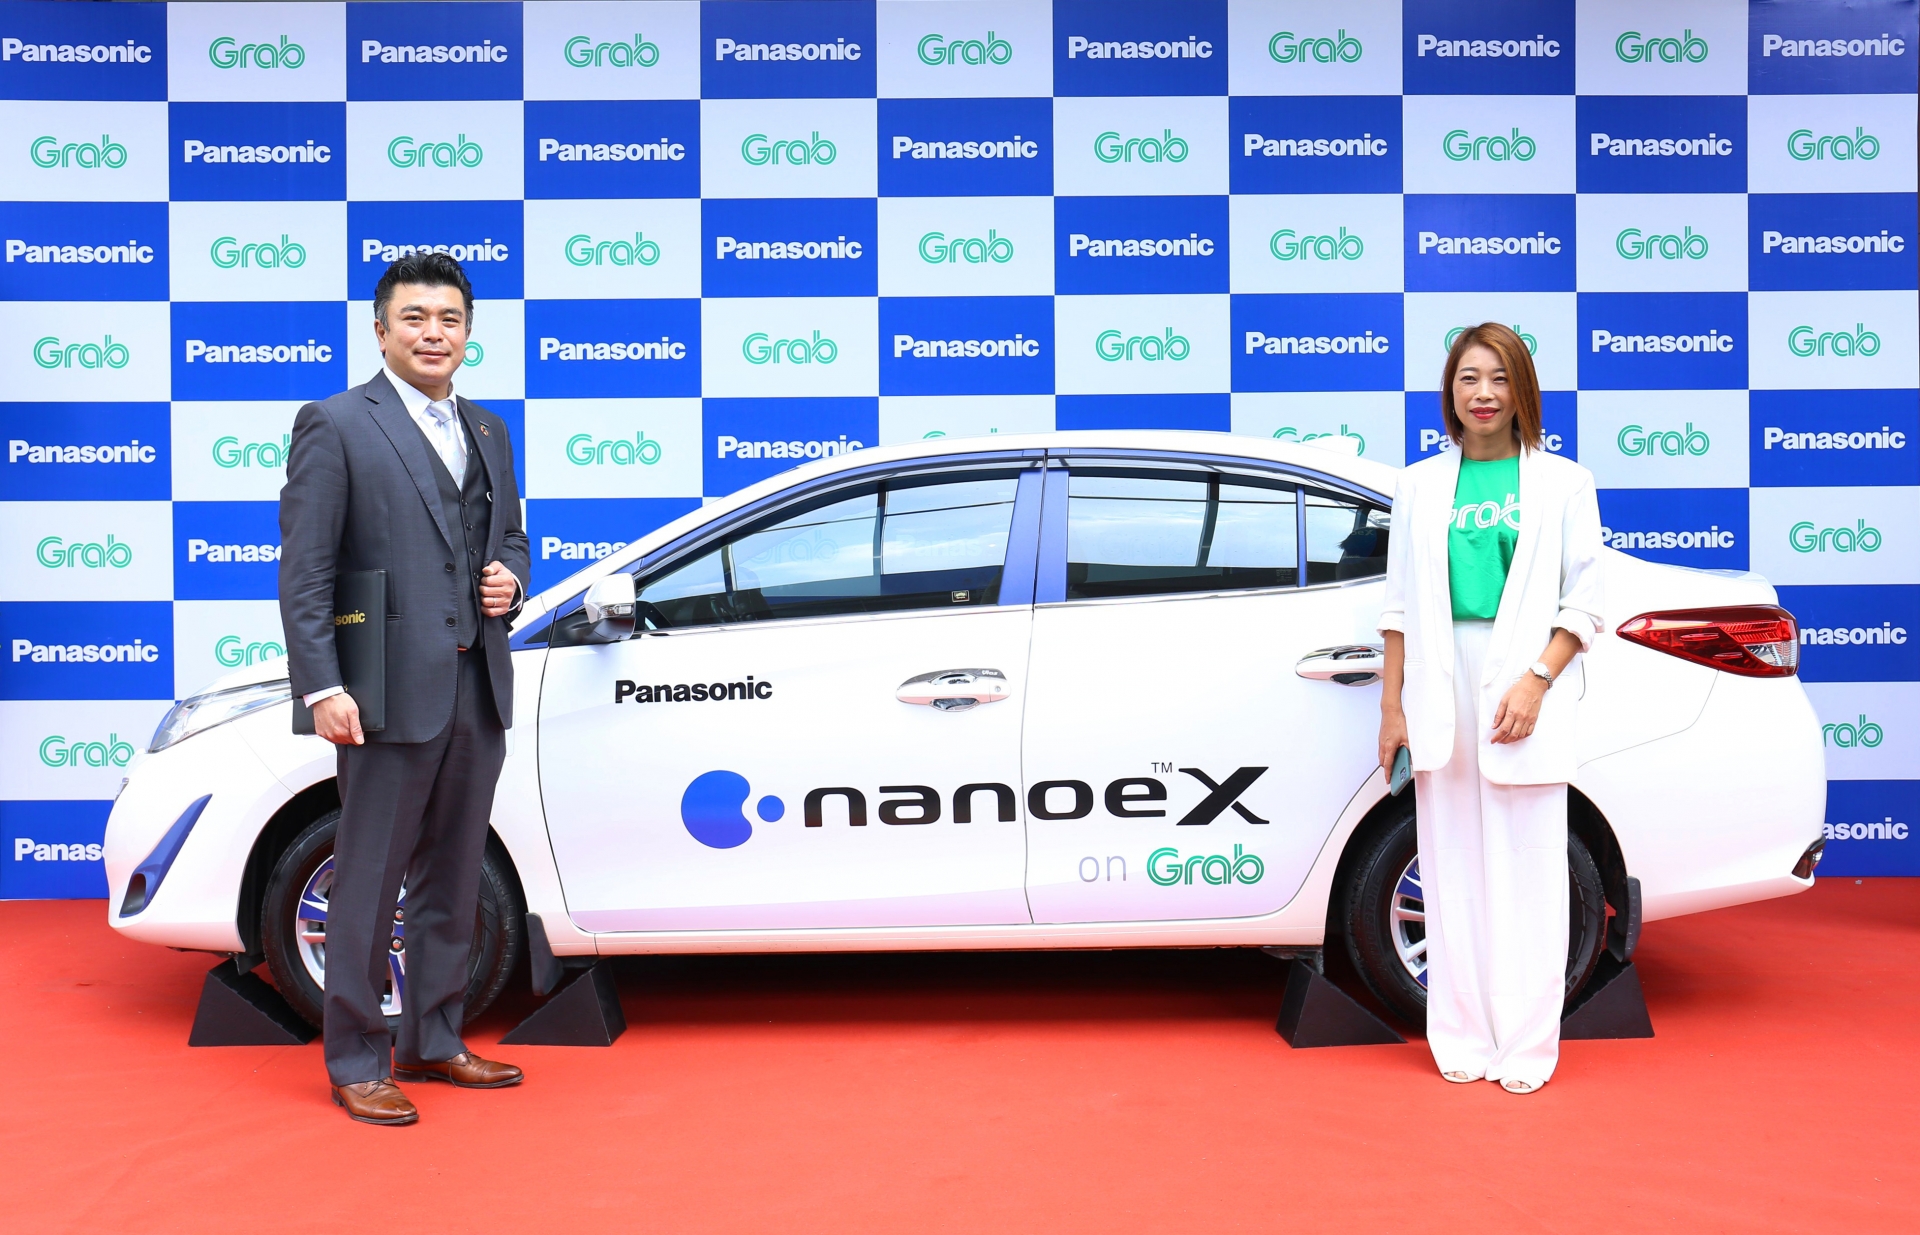 2000 grabcar vehicles to be equipped with panasonic nanoe x air quality solutions